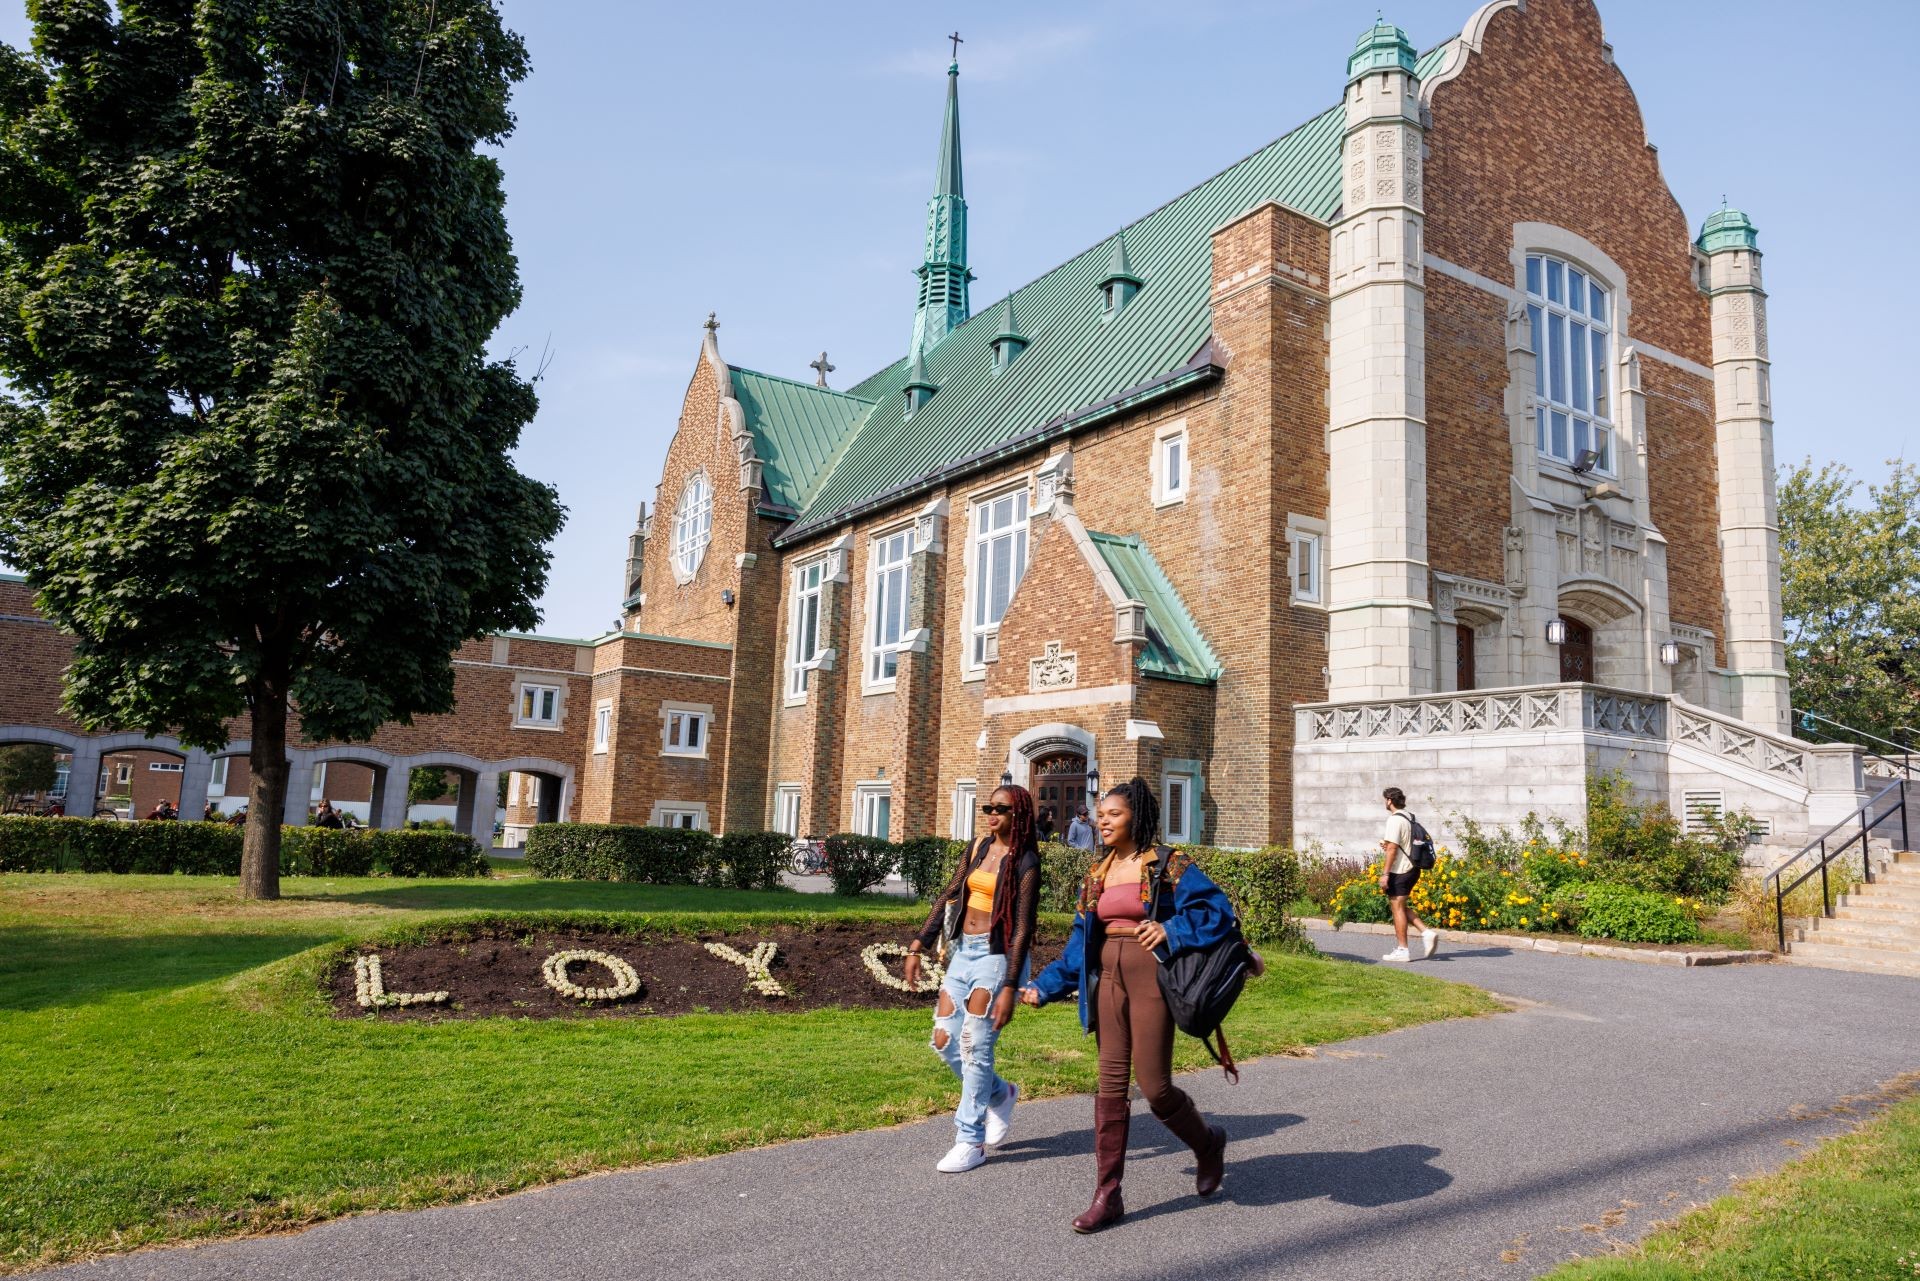 Two students walking past the historic Loyola campus building with "LOY" spelled out in a flower bed in the foreground.